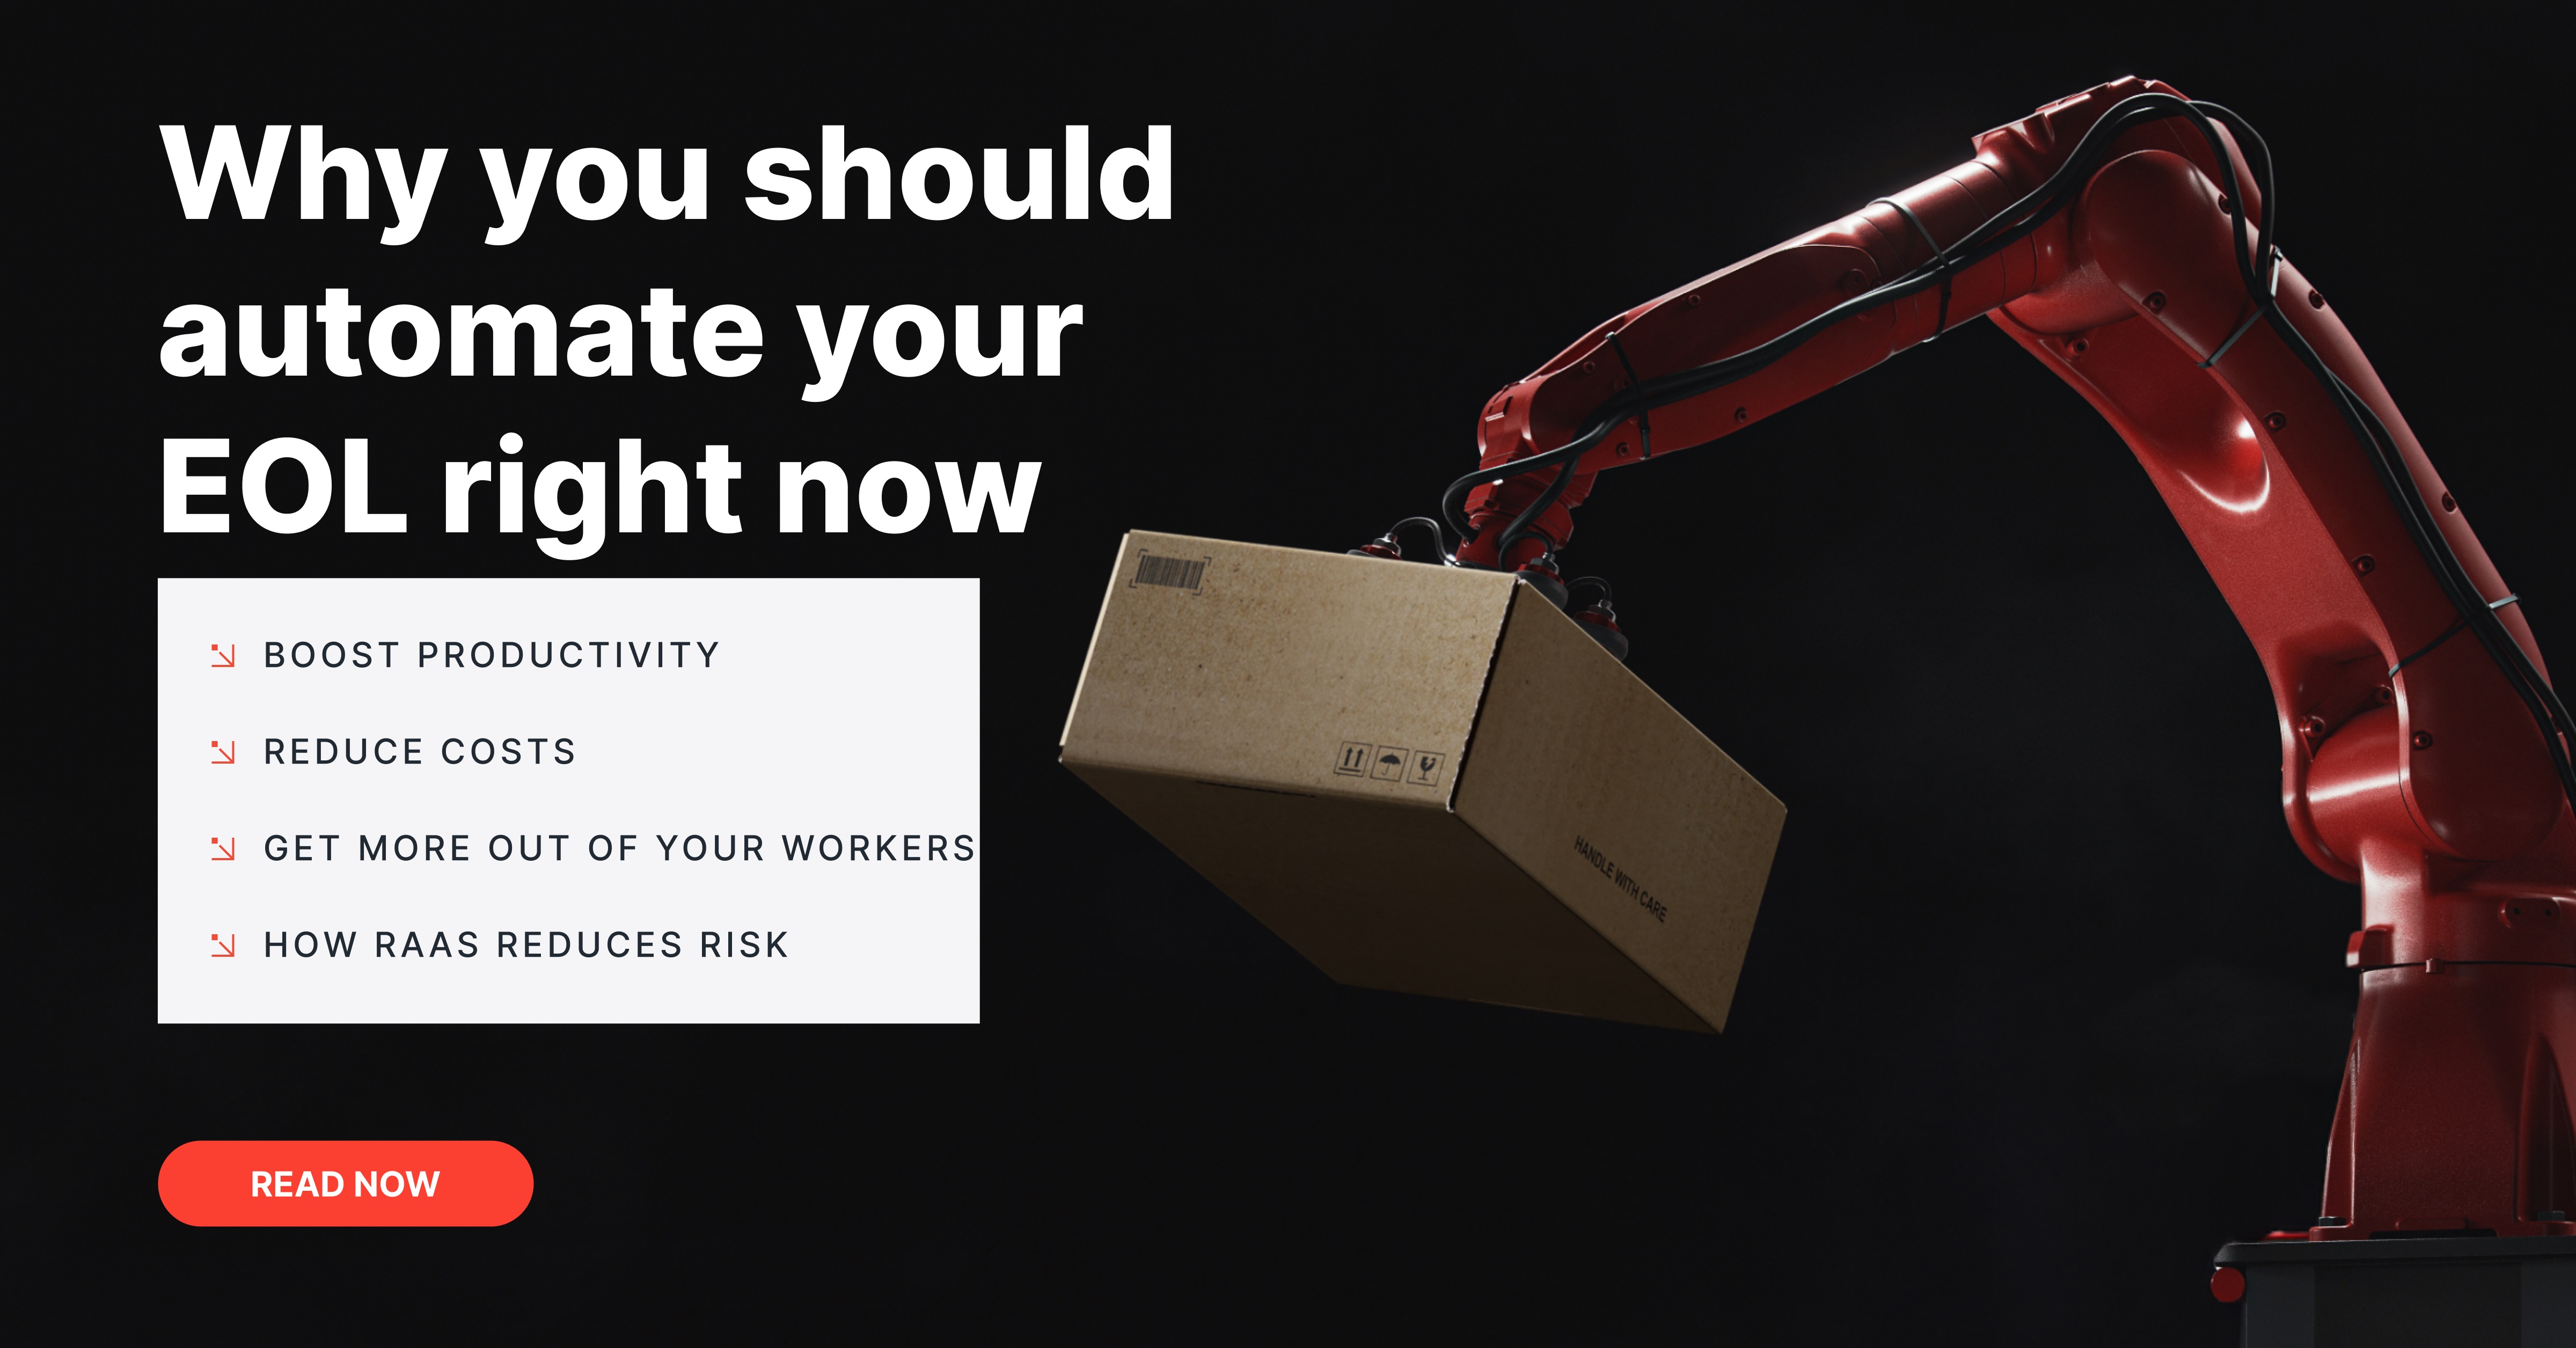 A red industrial robot on a black background, holding a cardboard box with a suction gripper. Headline copy reads 